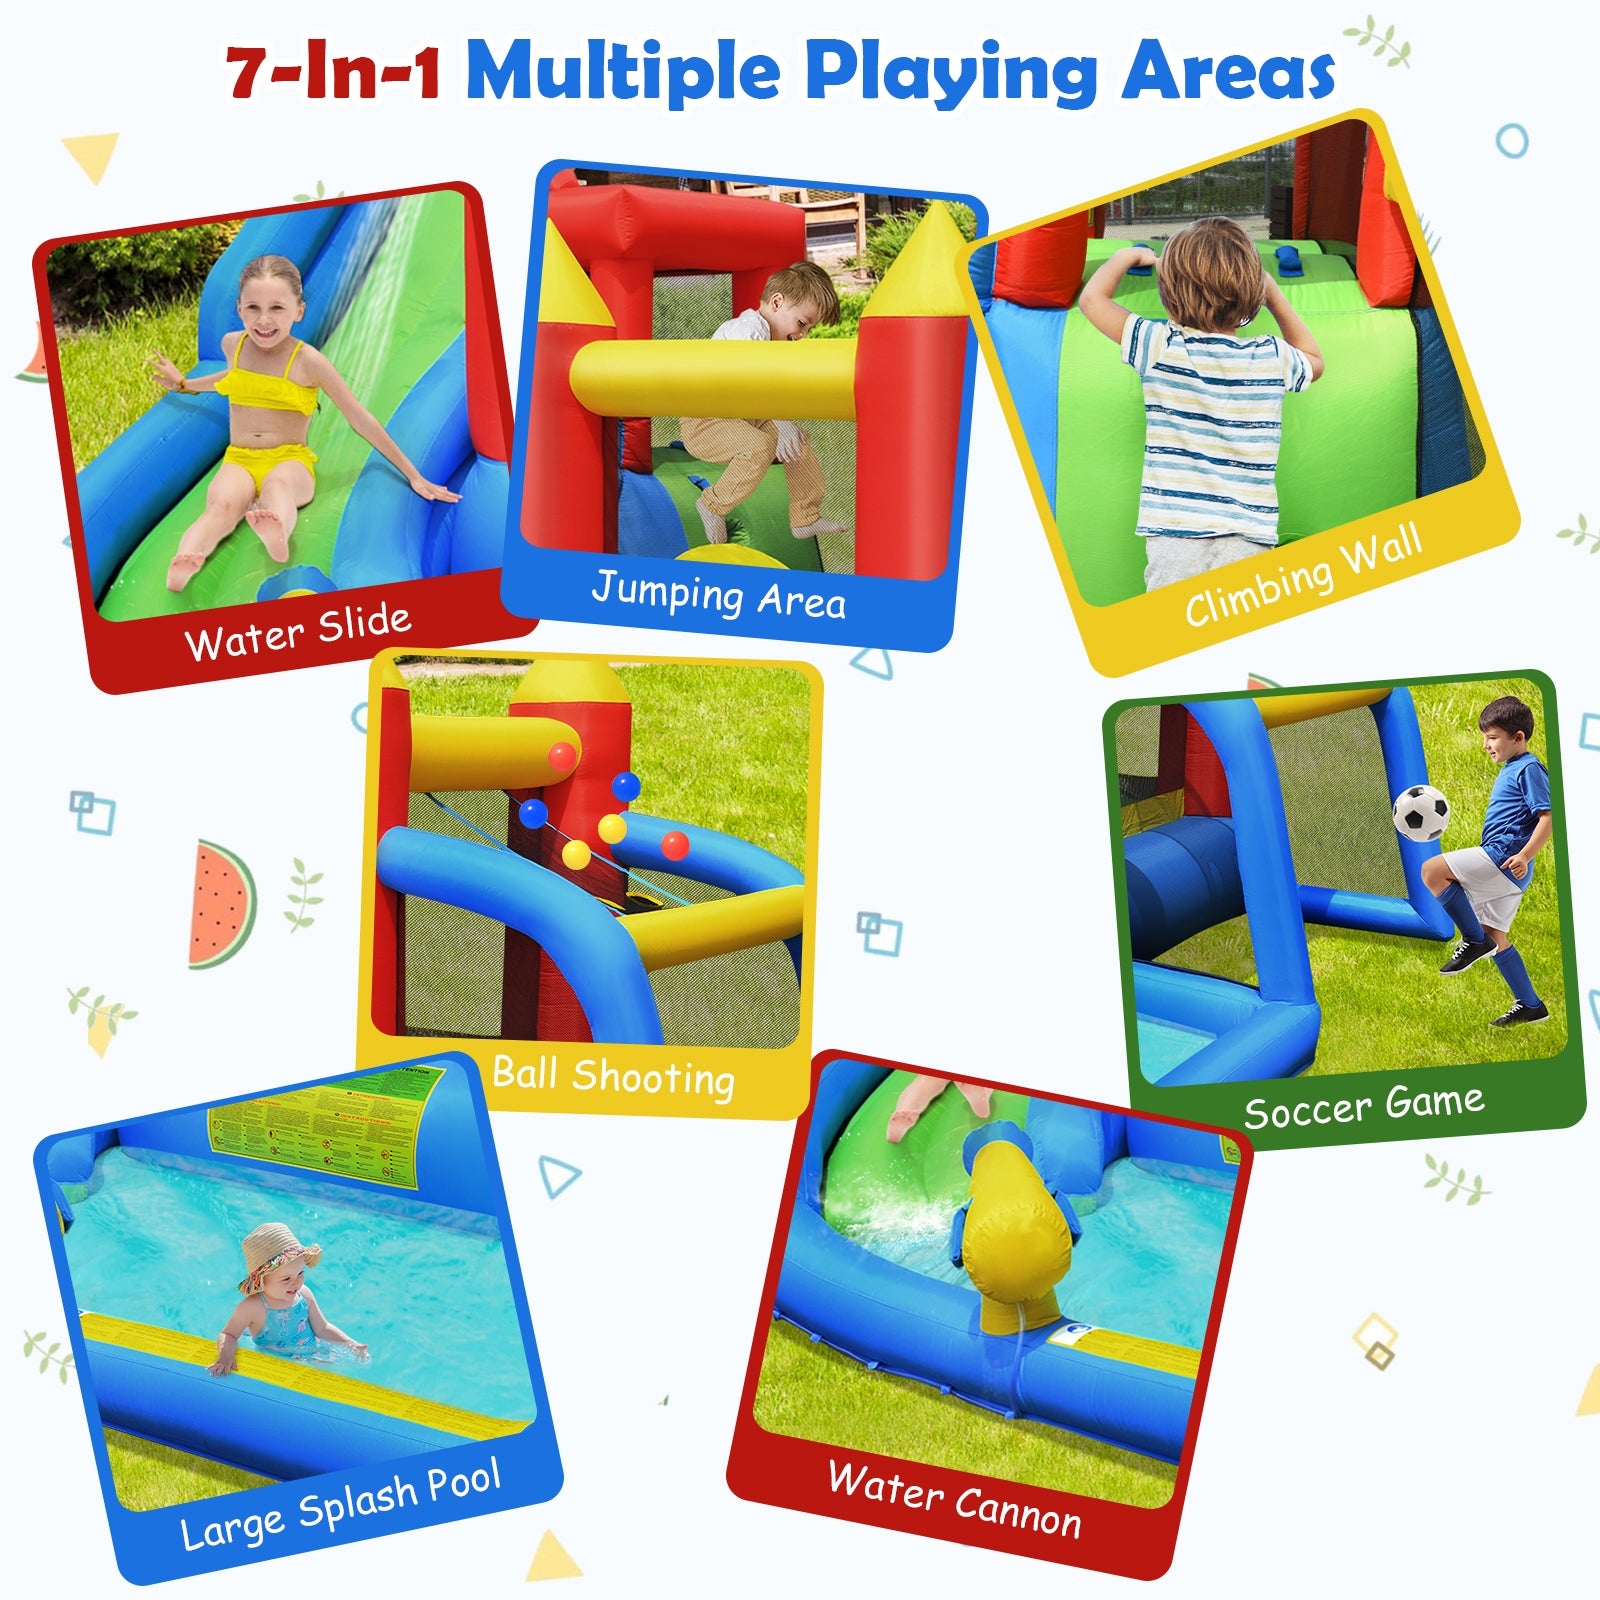 7-in-1 Inflatable Bounce House Splash Pool with Water Climb Slide with Blower